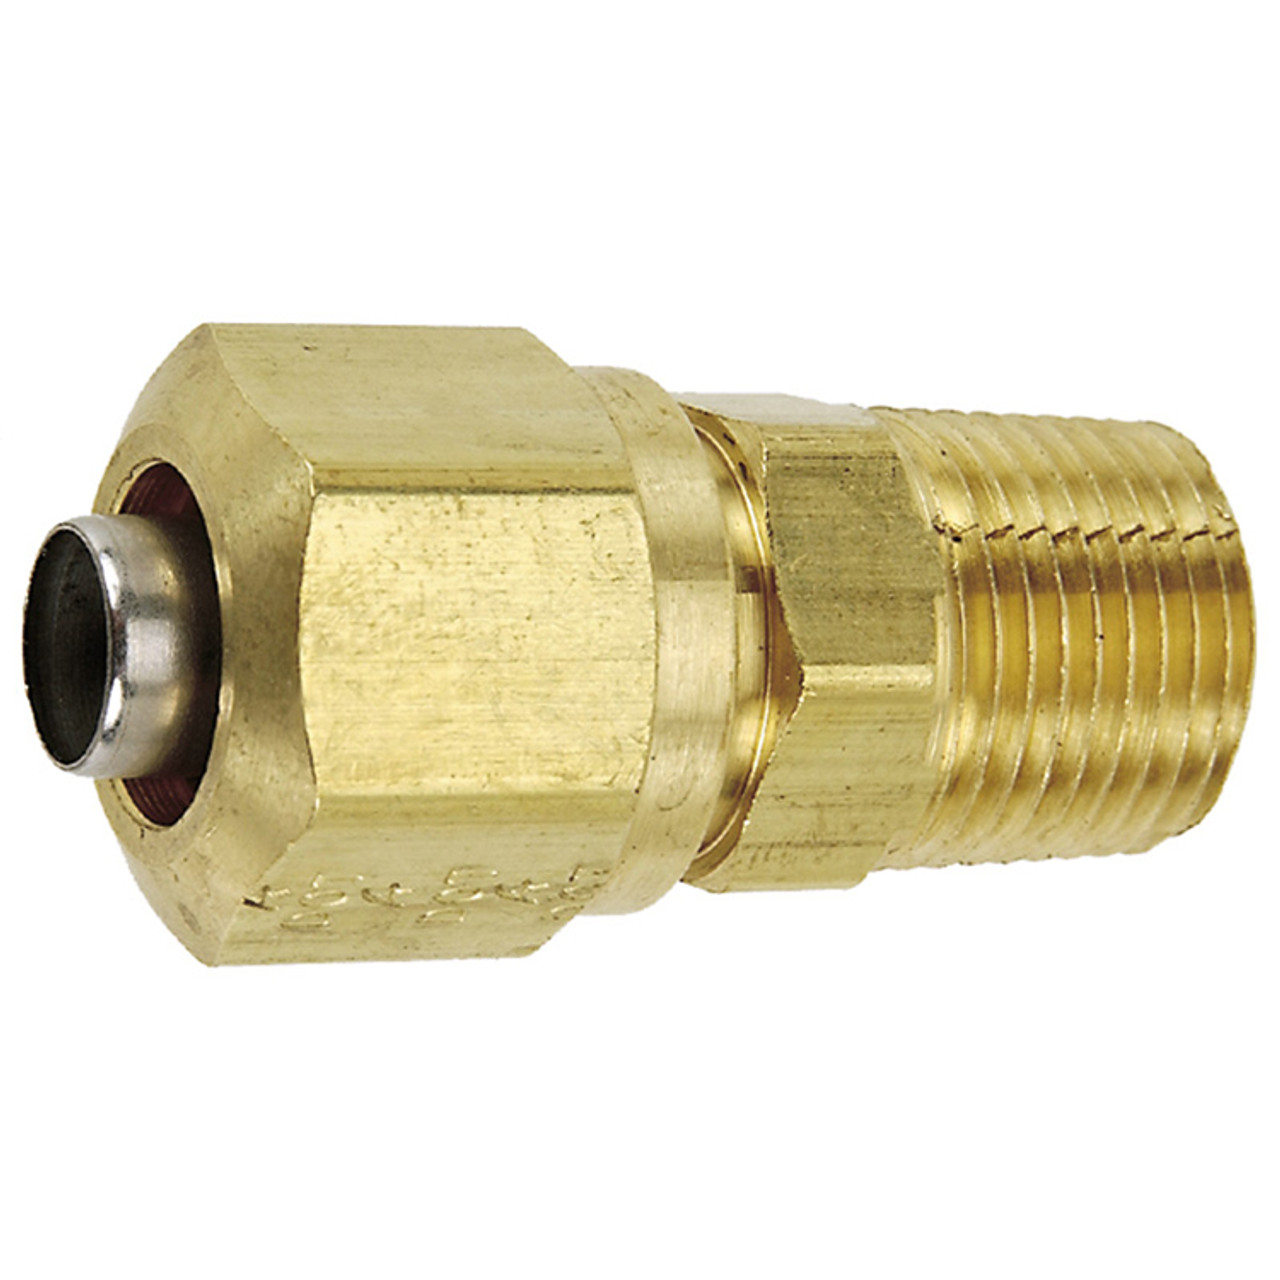 3/8 x 5/8" Brass DOT Male NPT - Compression Connector   G7016-06-10